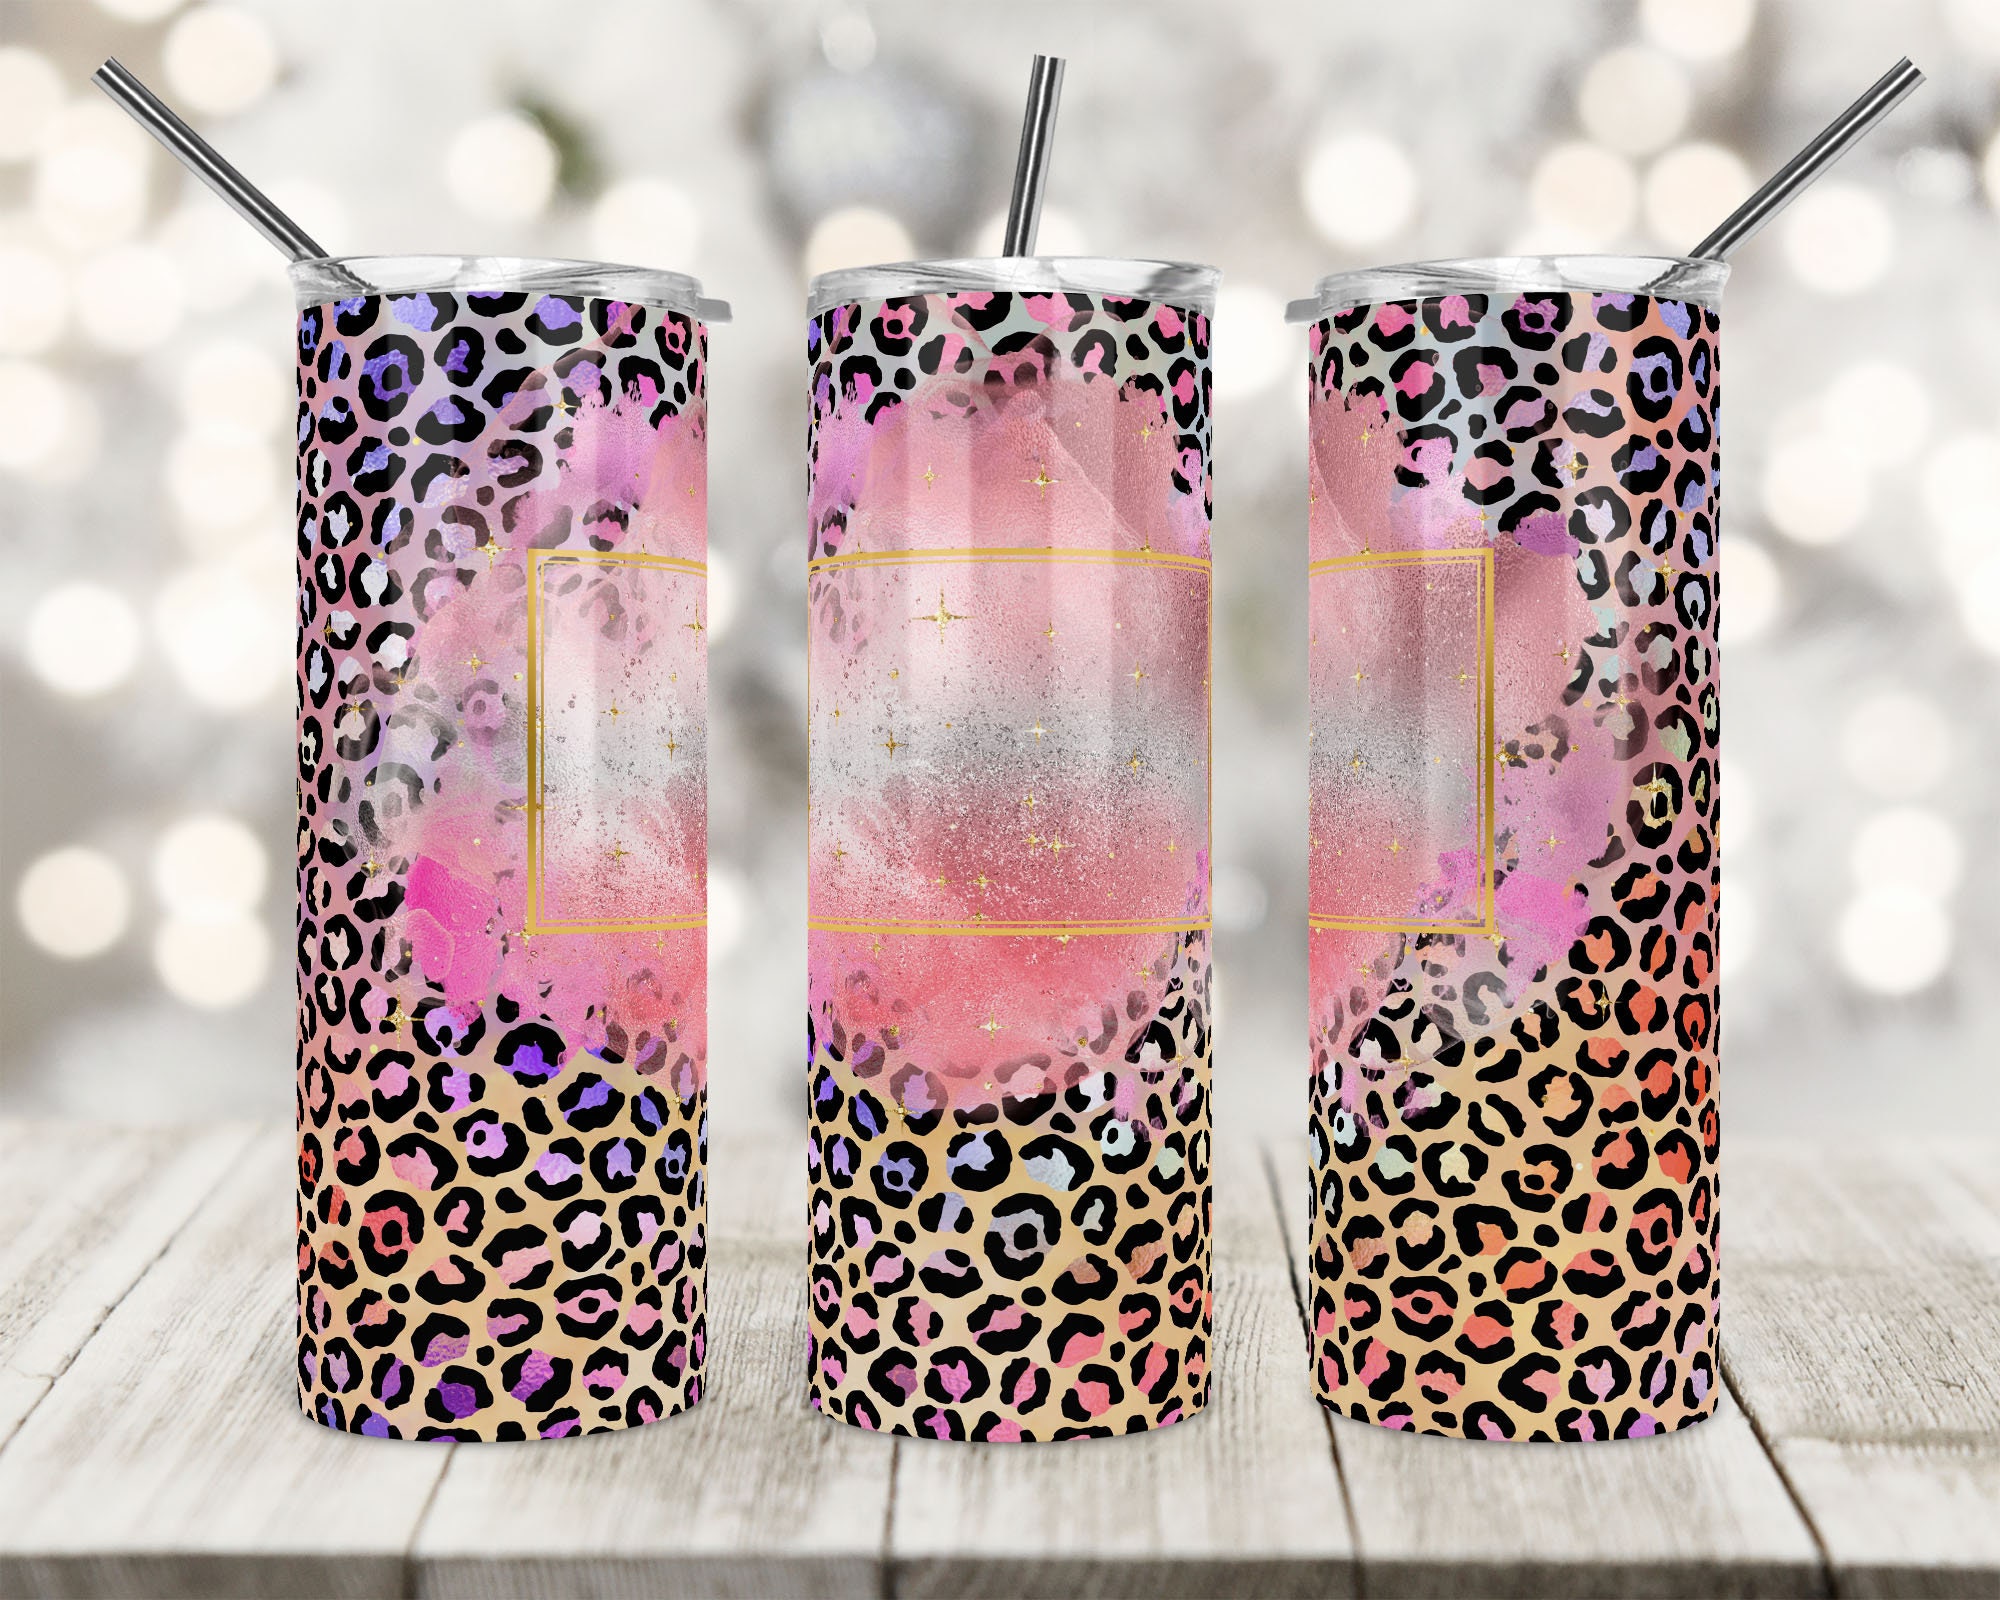 Leopard & Roses Tumbler Holder  Sisters Boutique & Gifts, Inc.